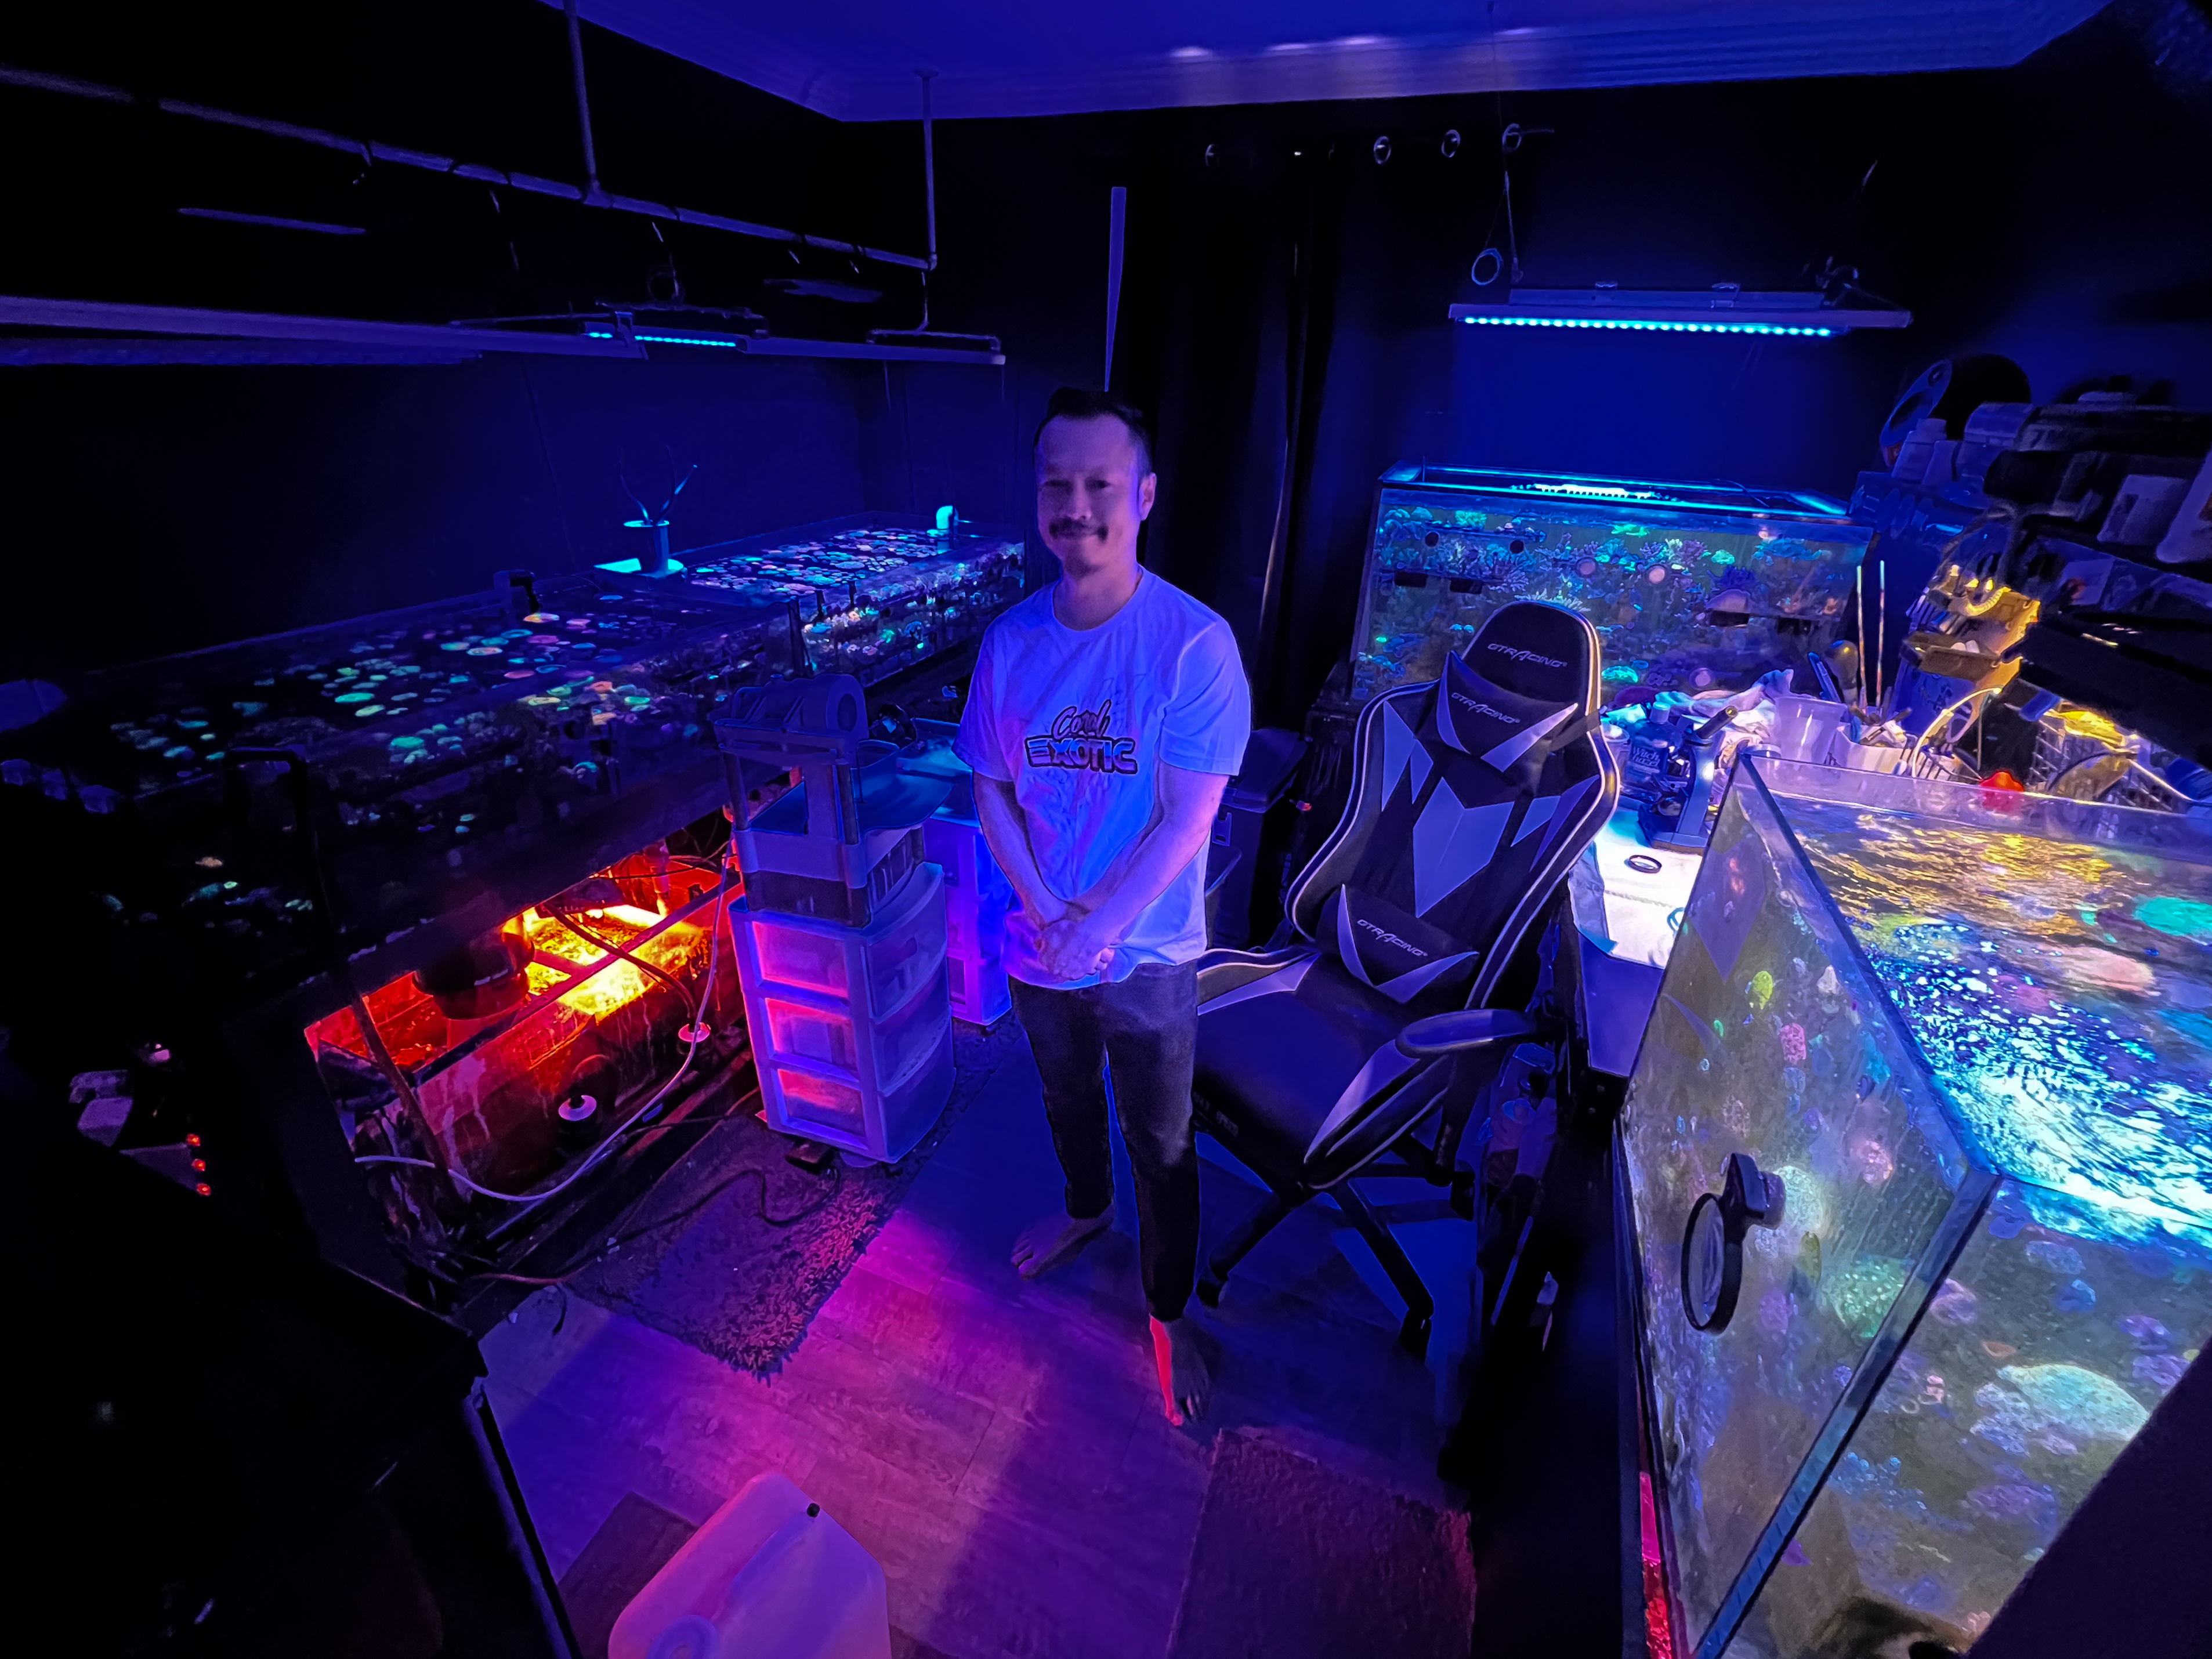 A man stands in a room lit by blue lights, surrounded by vibrant aquariums and coral tanks, with a gaming chair to the right.